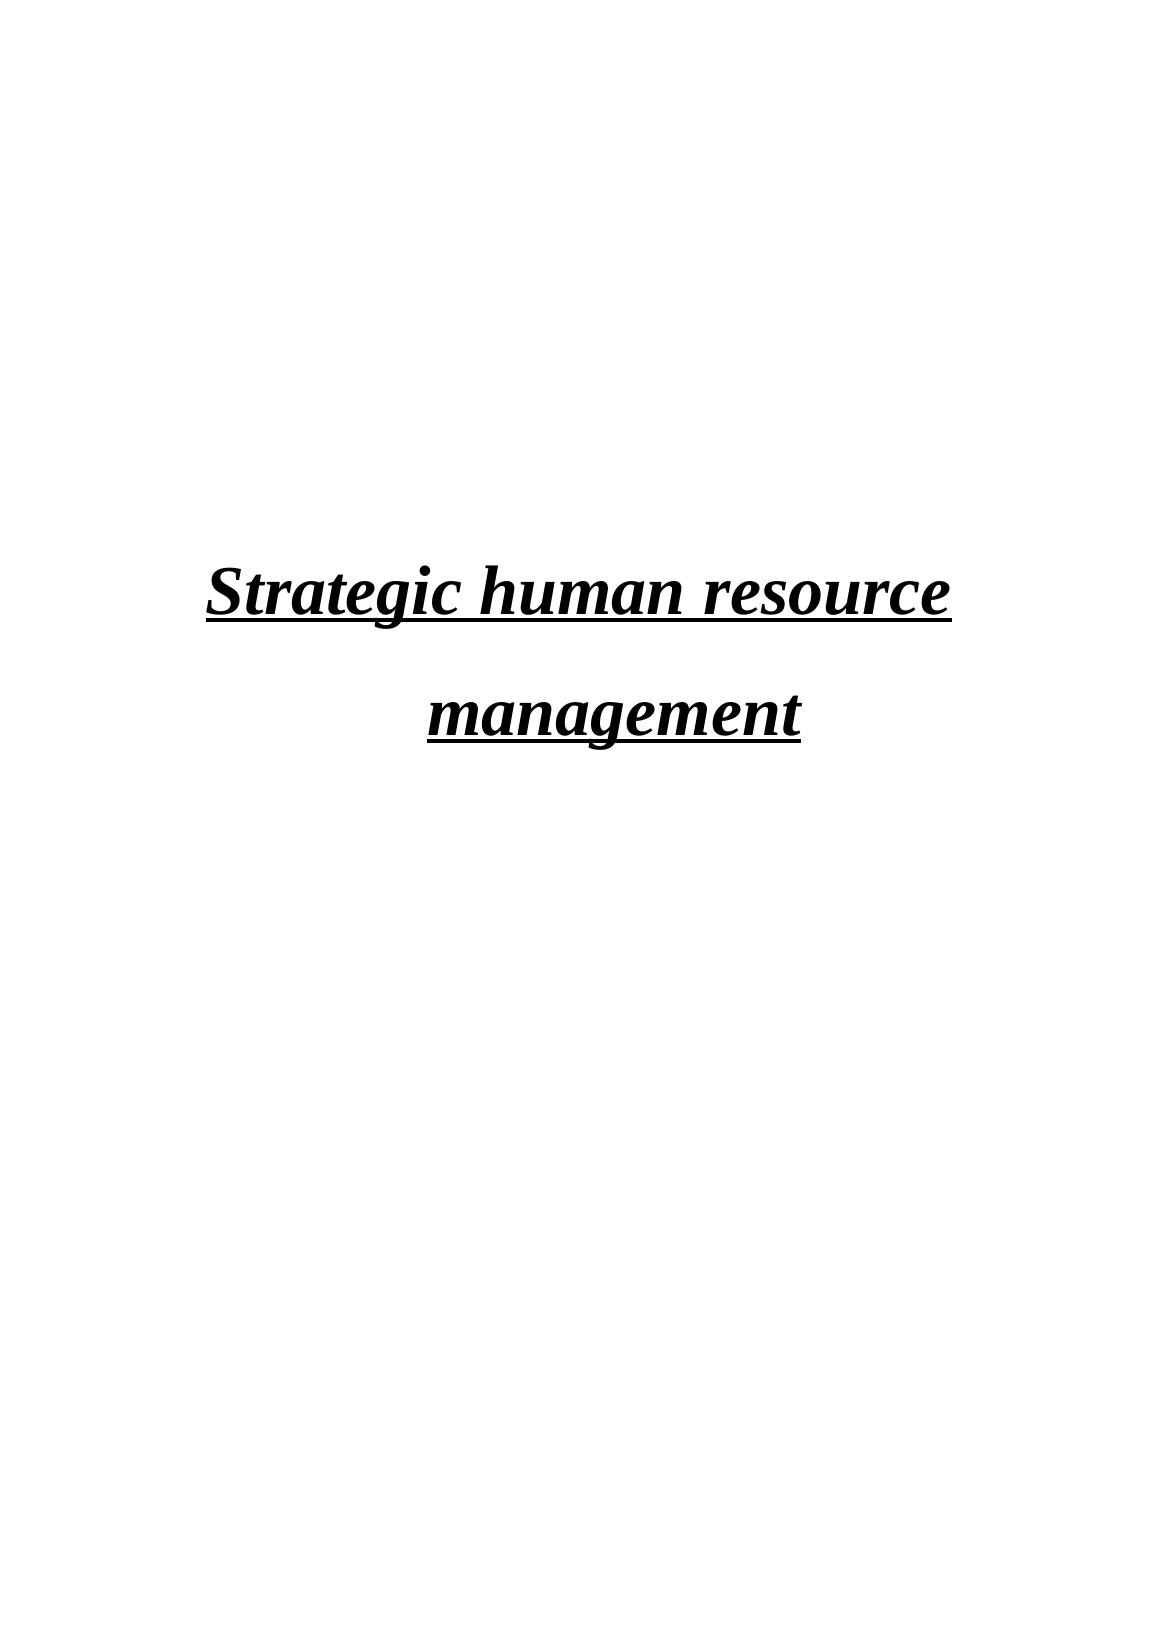 Strategic Human Resource Management: IPRP Trend for Motivating Employees_1